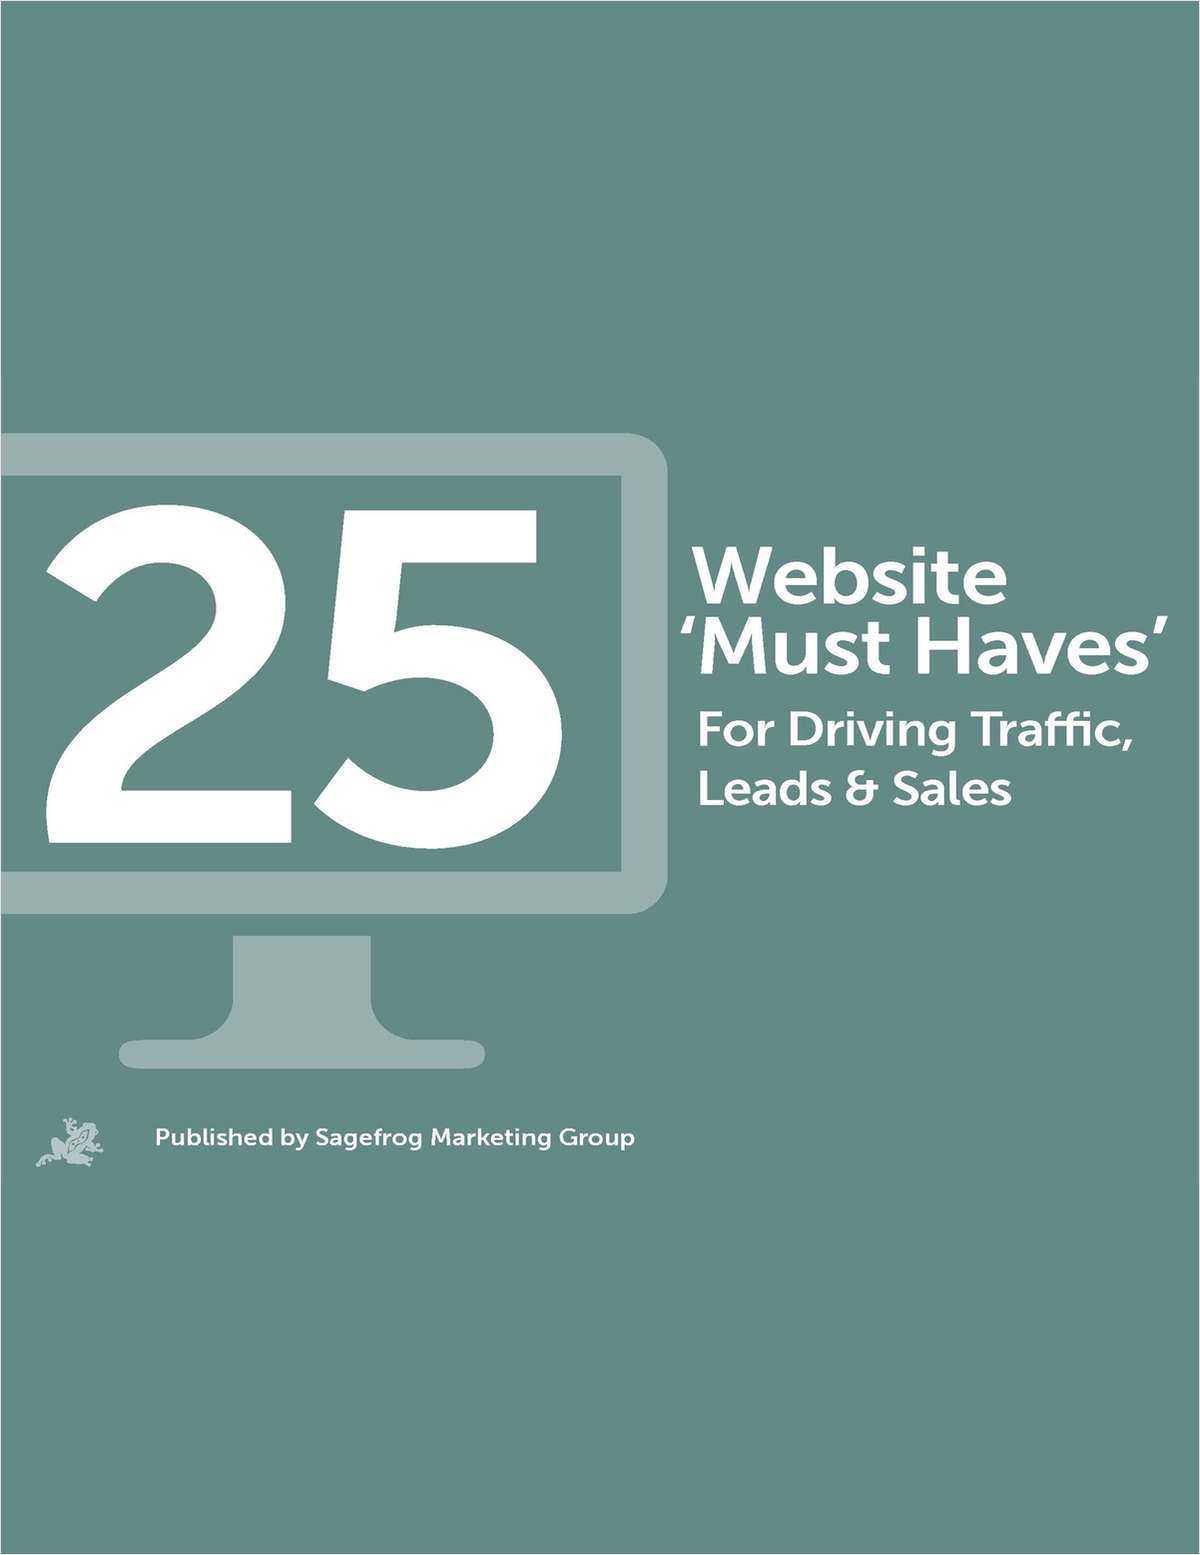 25 Website 'Must Haves' for Driving Traffic, Leads & Sales